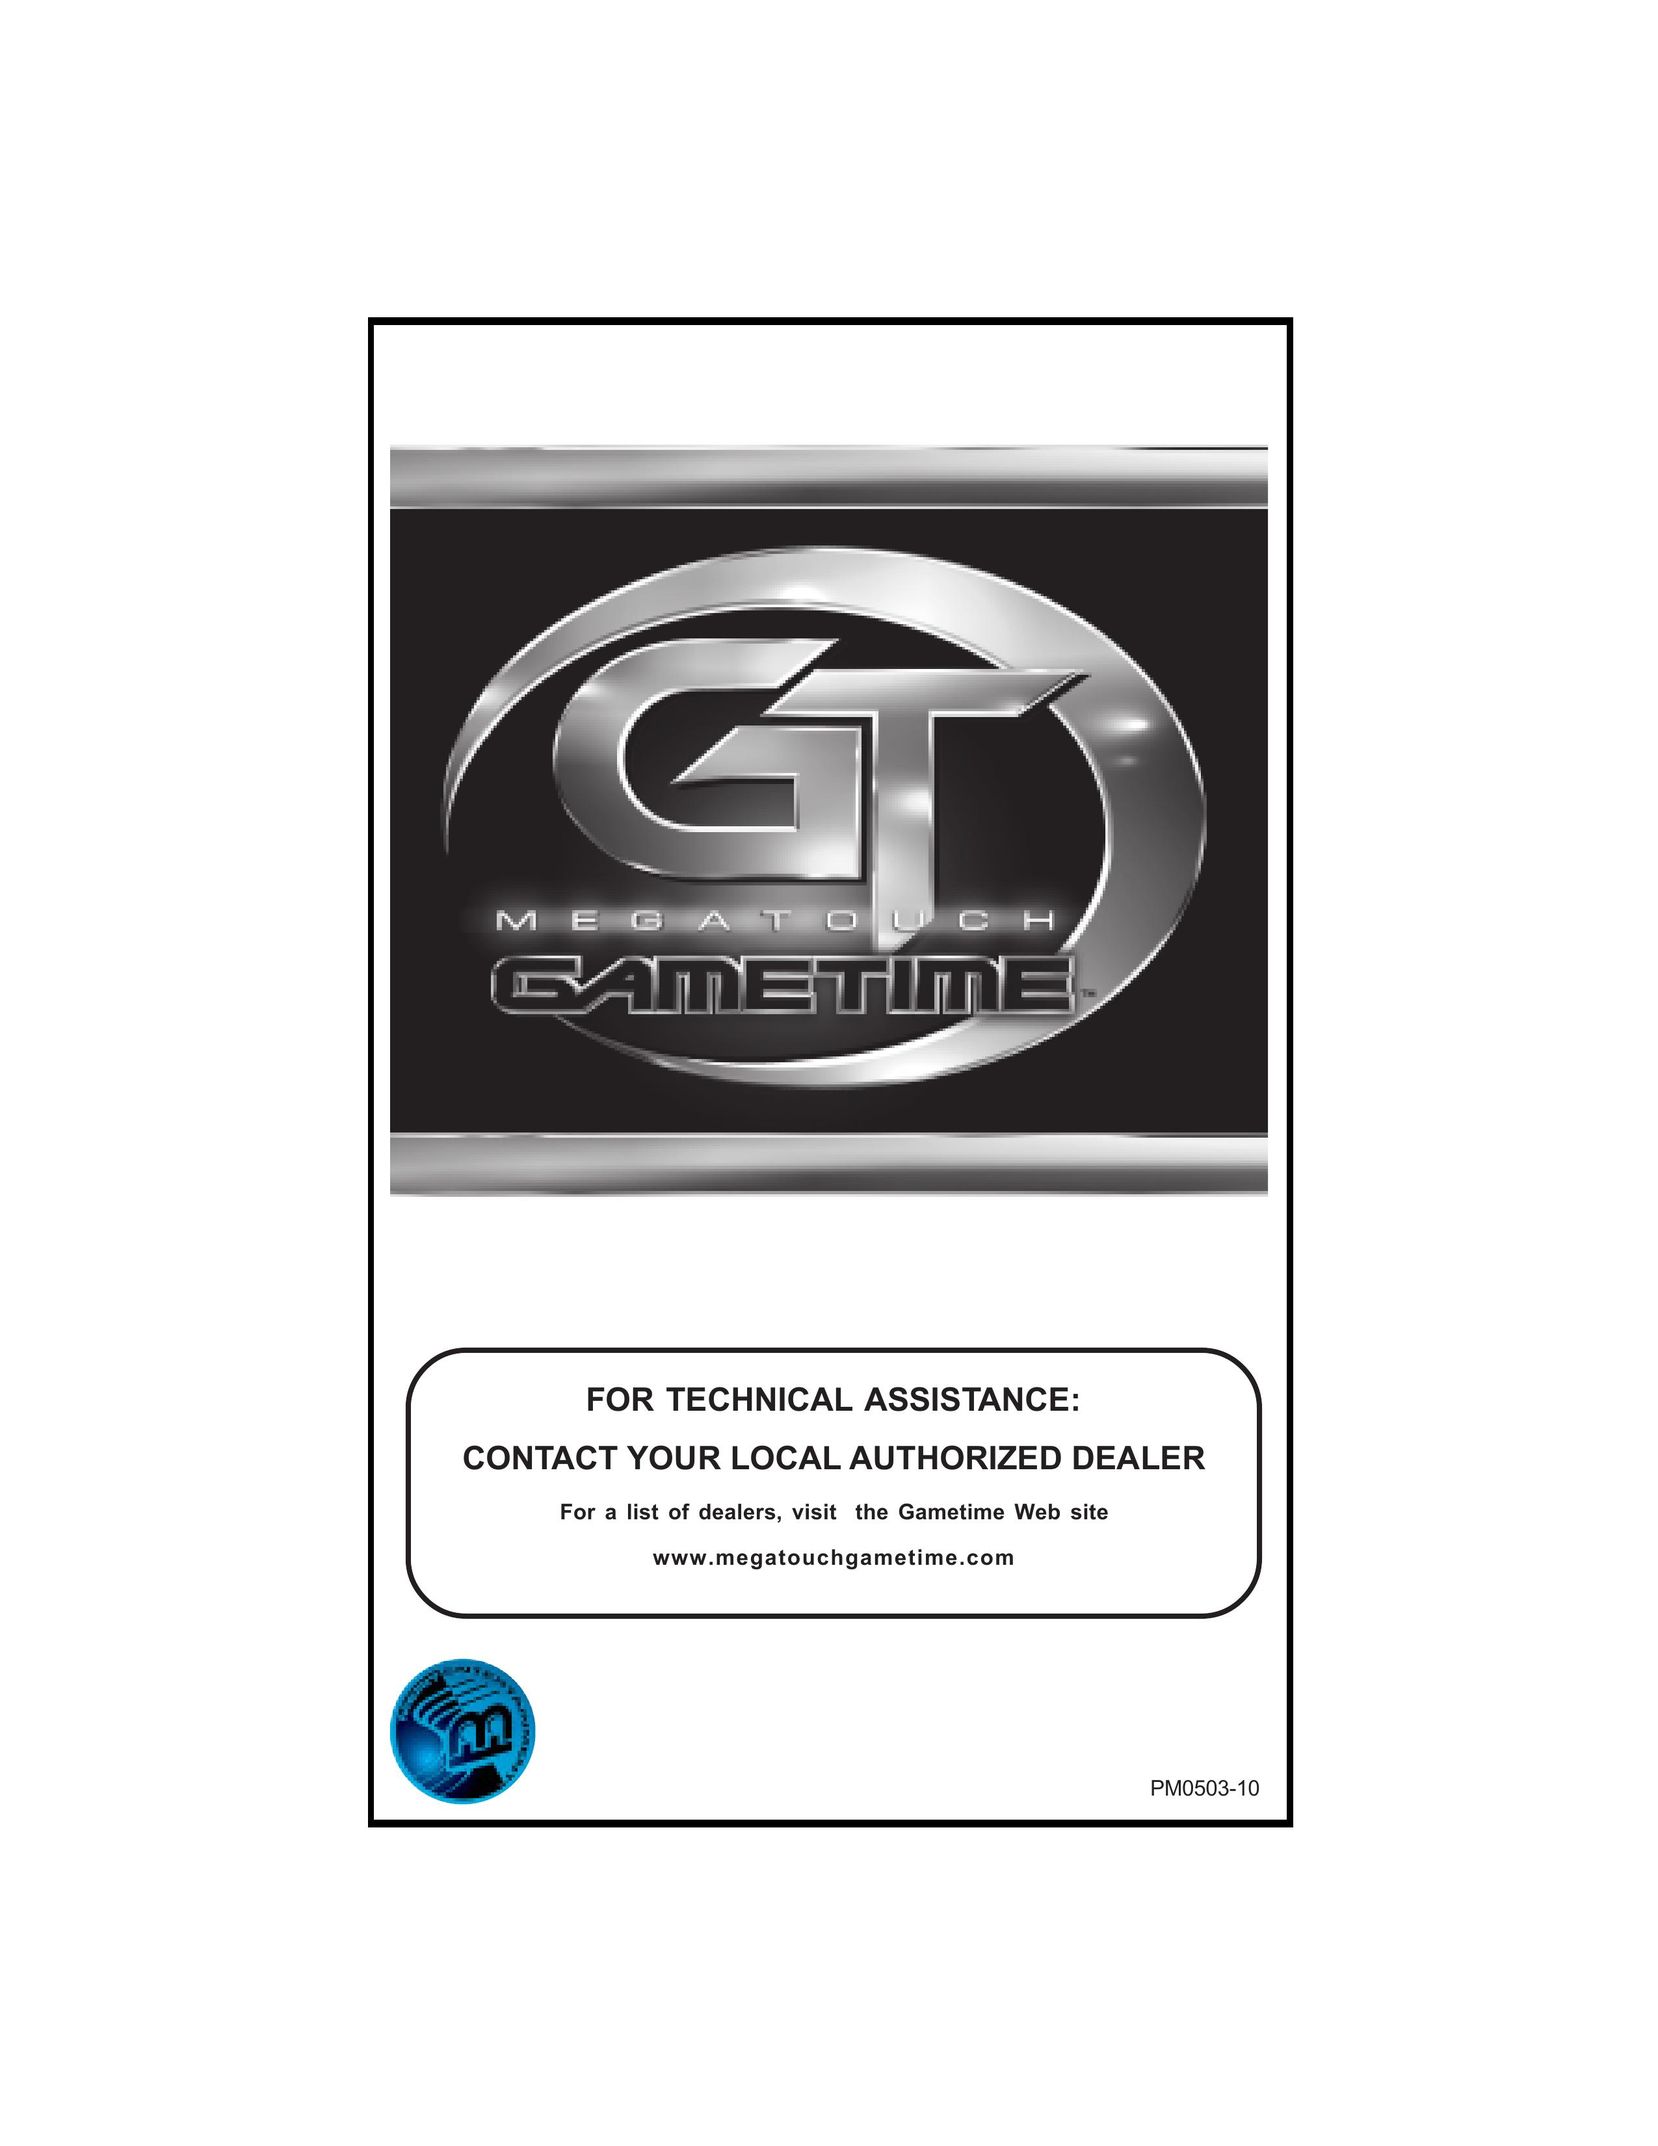 AB Soft PM0503-10 Video Game Console User Manual (Page 1)